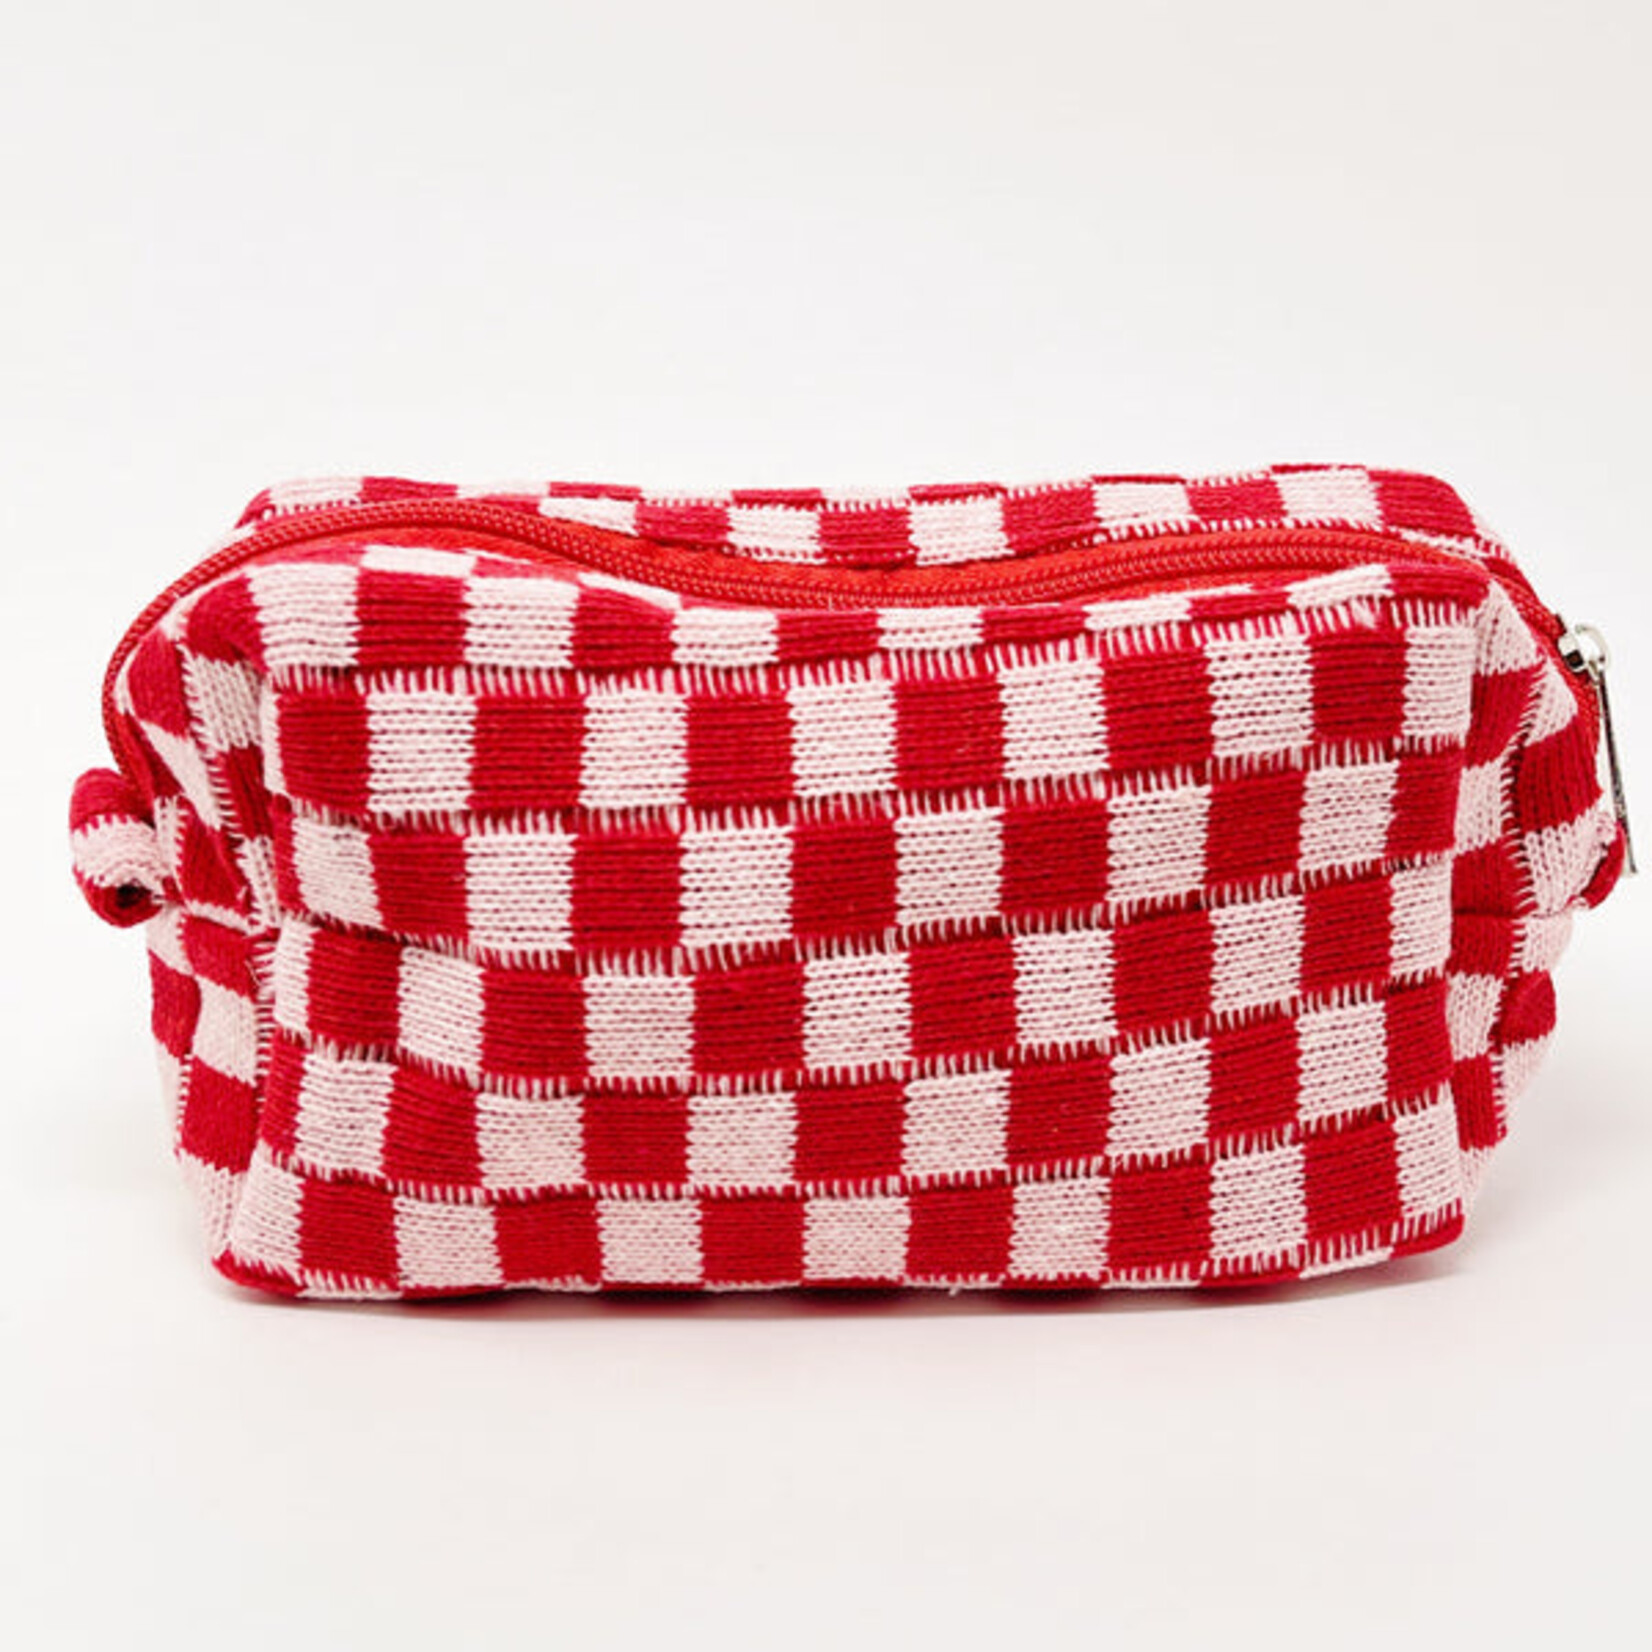 Carly Miller Consignment Cherry Checkered Bag